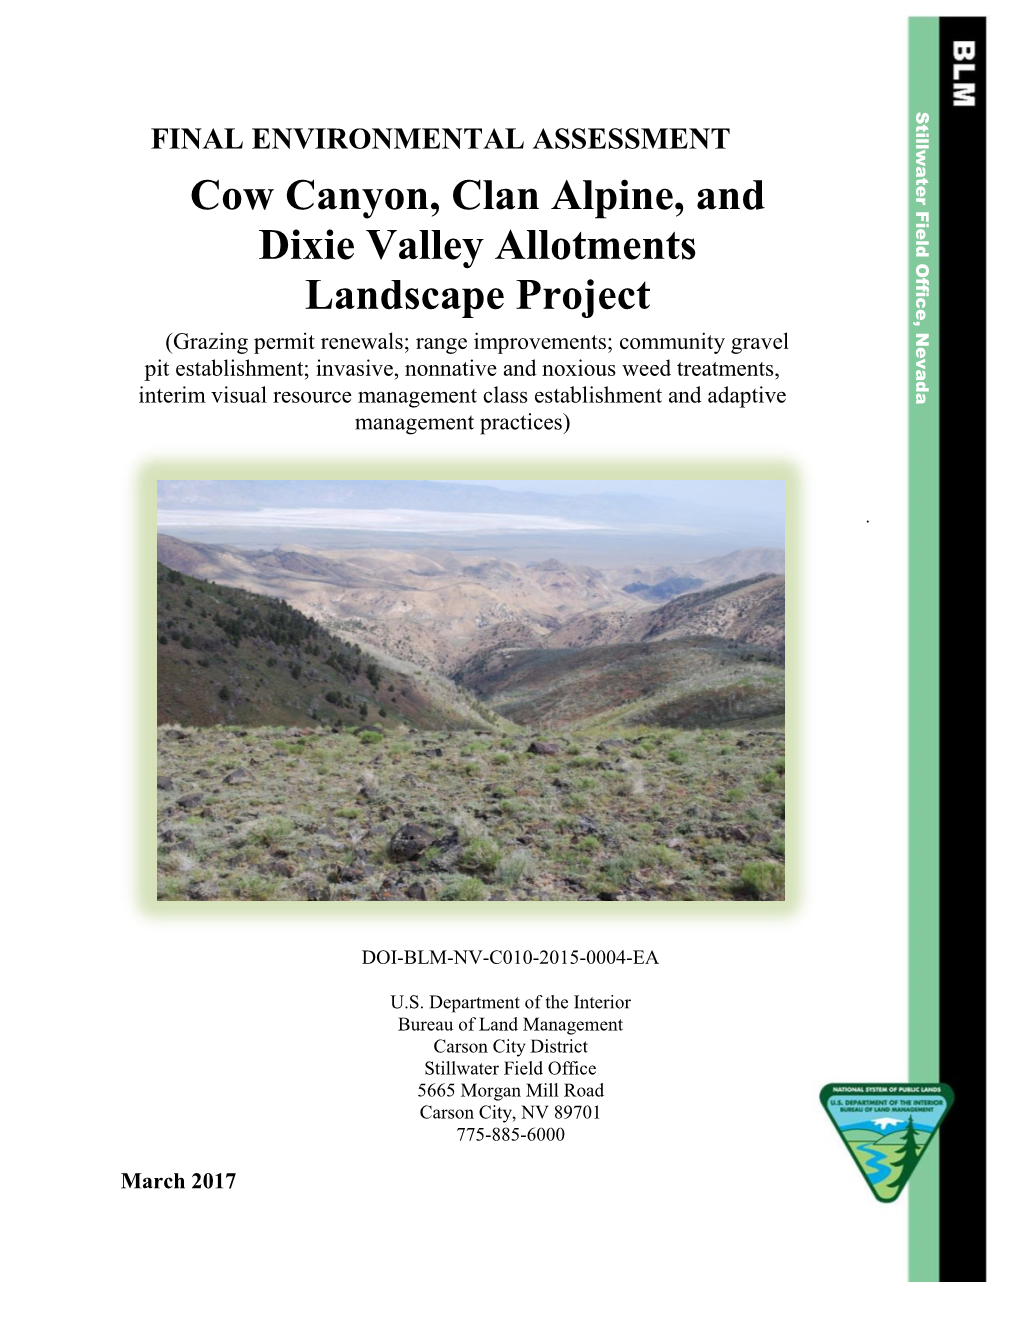 Cow Canyon, Clan Alpine, and Dixie Valley Allotments Landscape Project